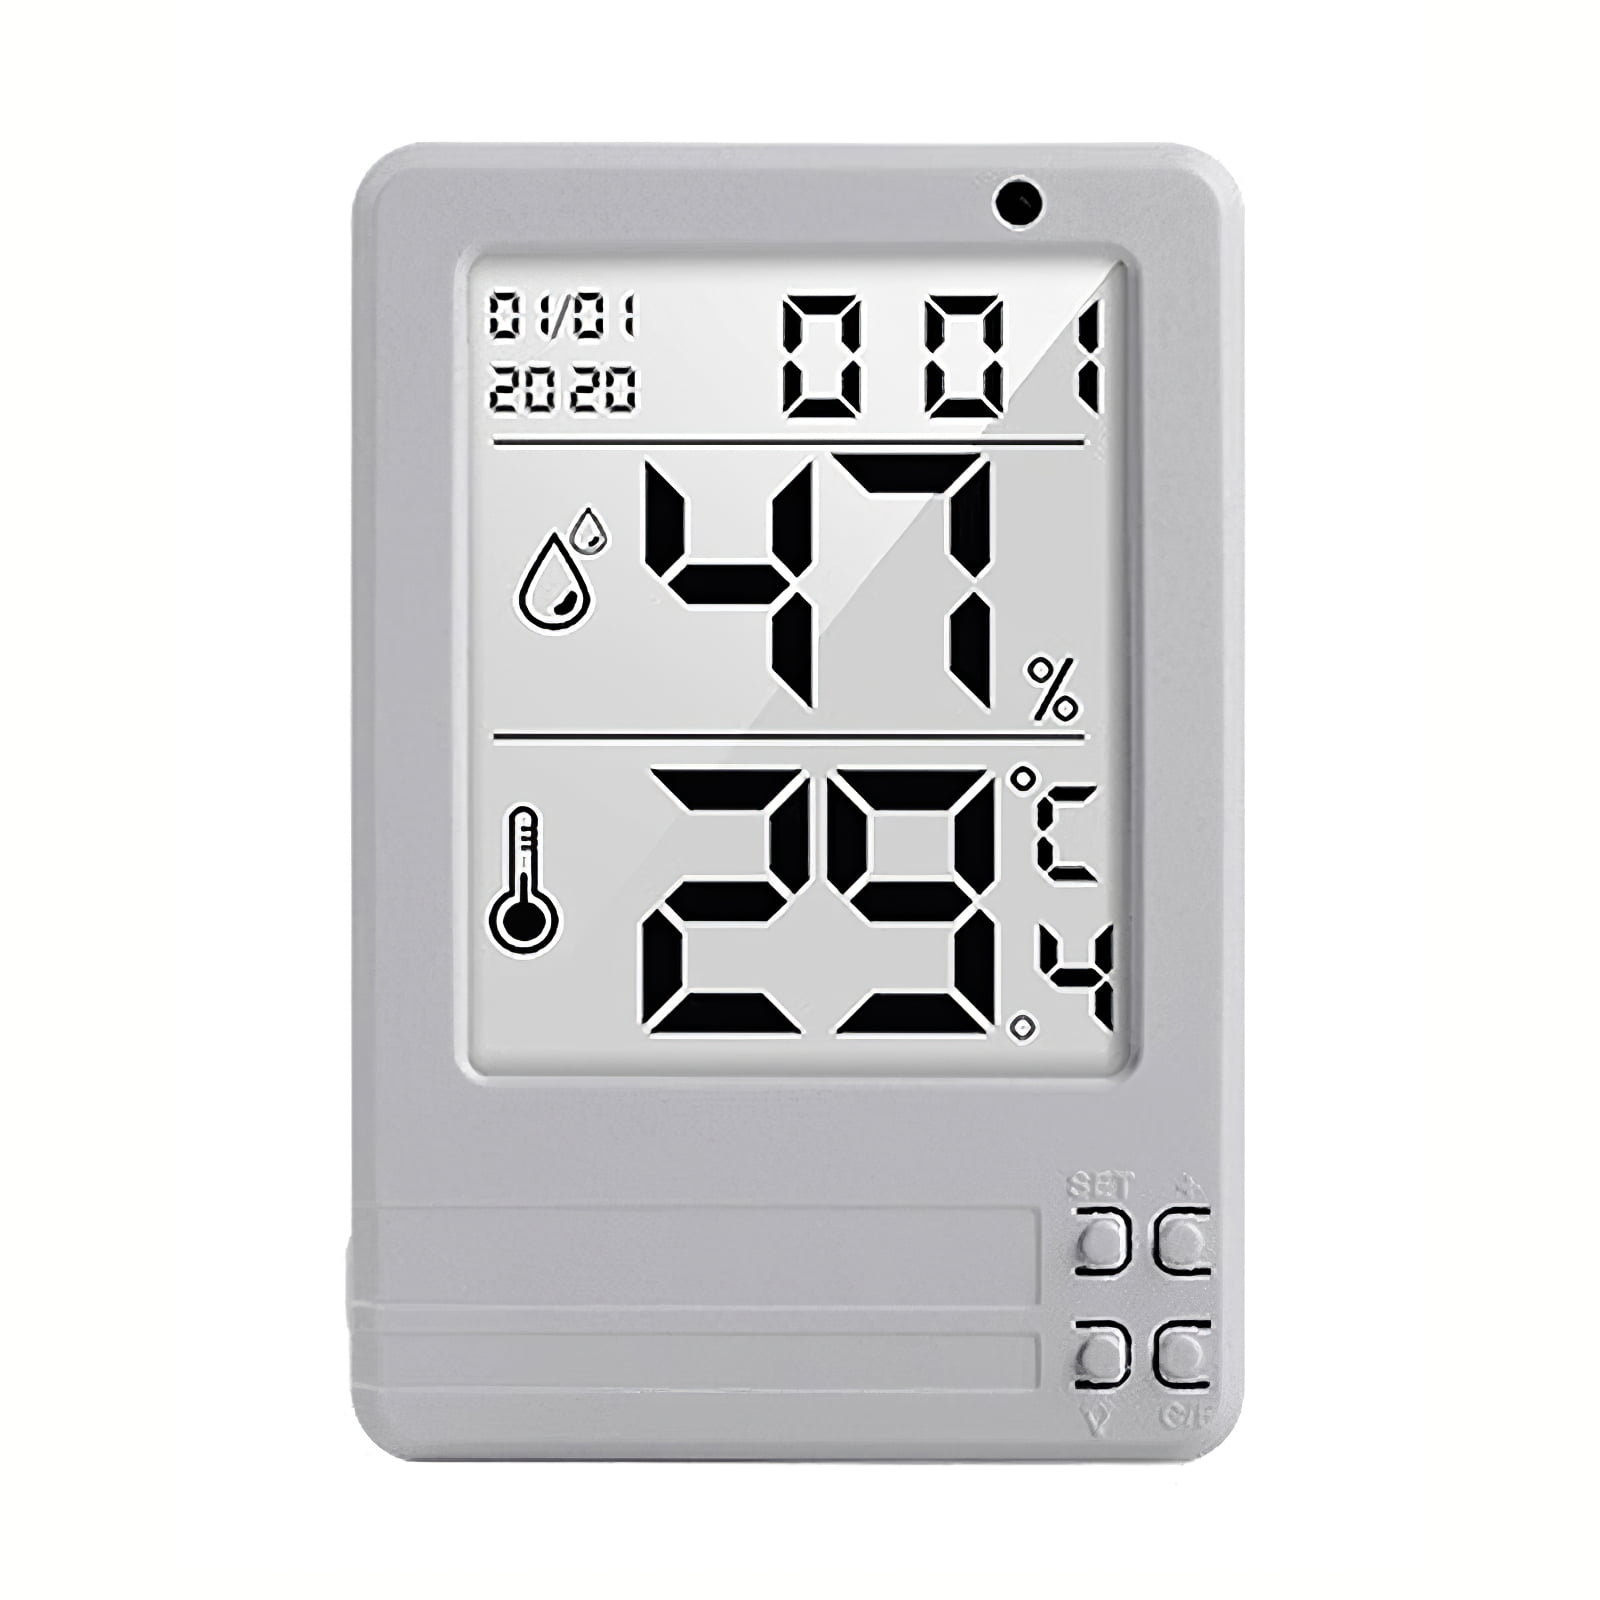 Details about   ABS Wireless LCD Digital Thermometer Hygrometer Mini Temperature Humidity 5